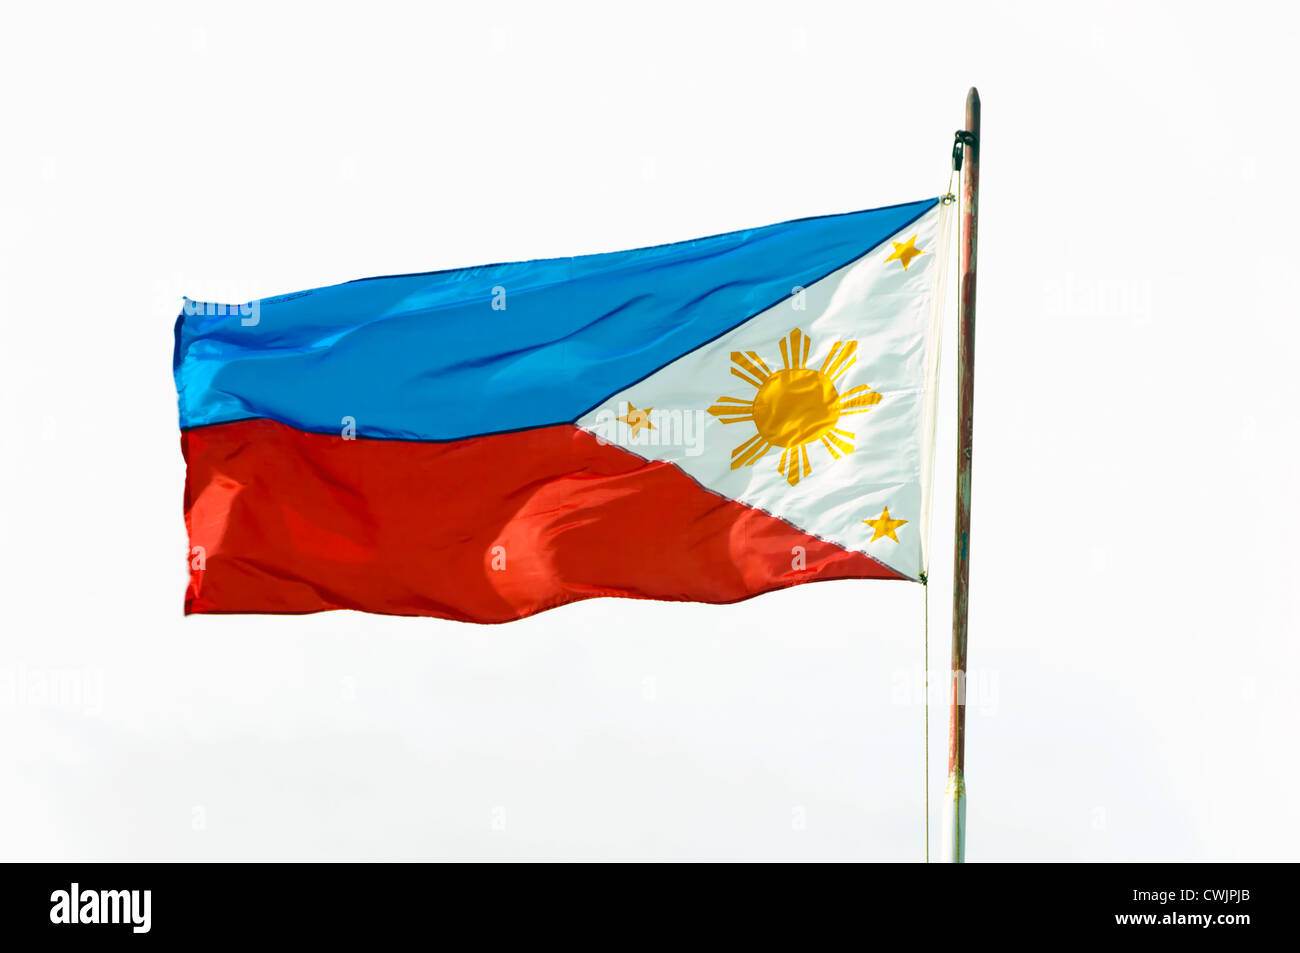 Full shot of wind blown flag of the Philippines Stock Photo